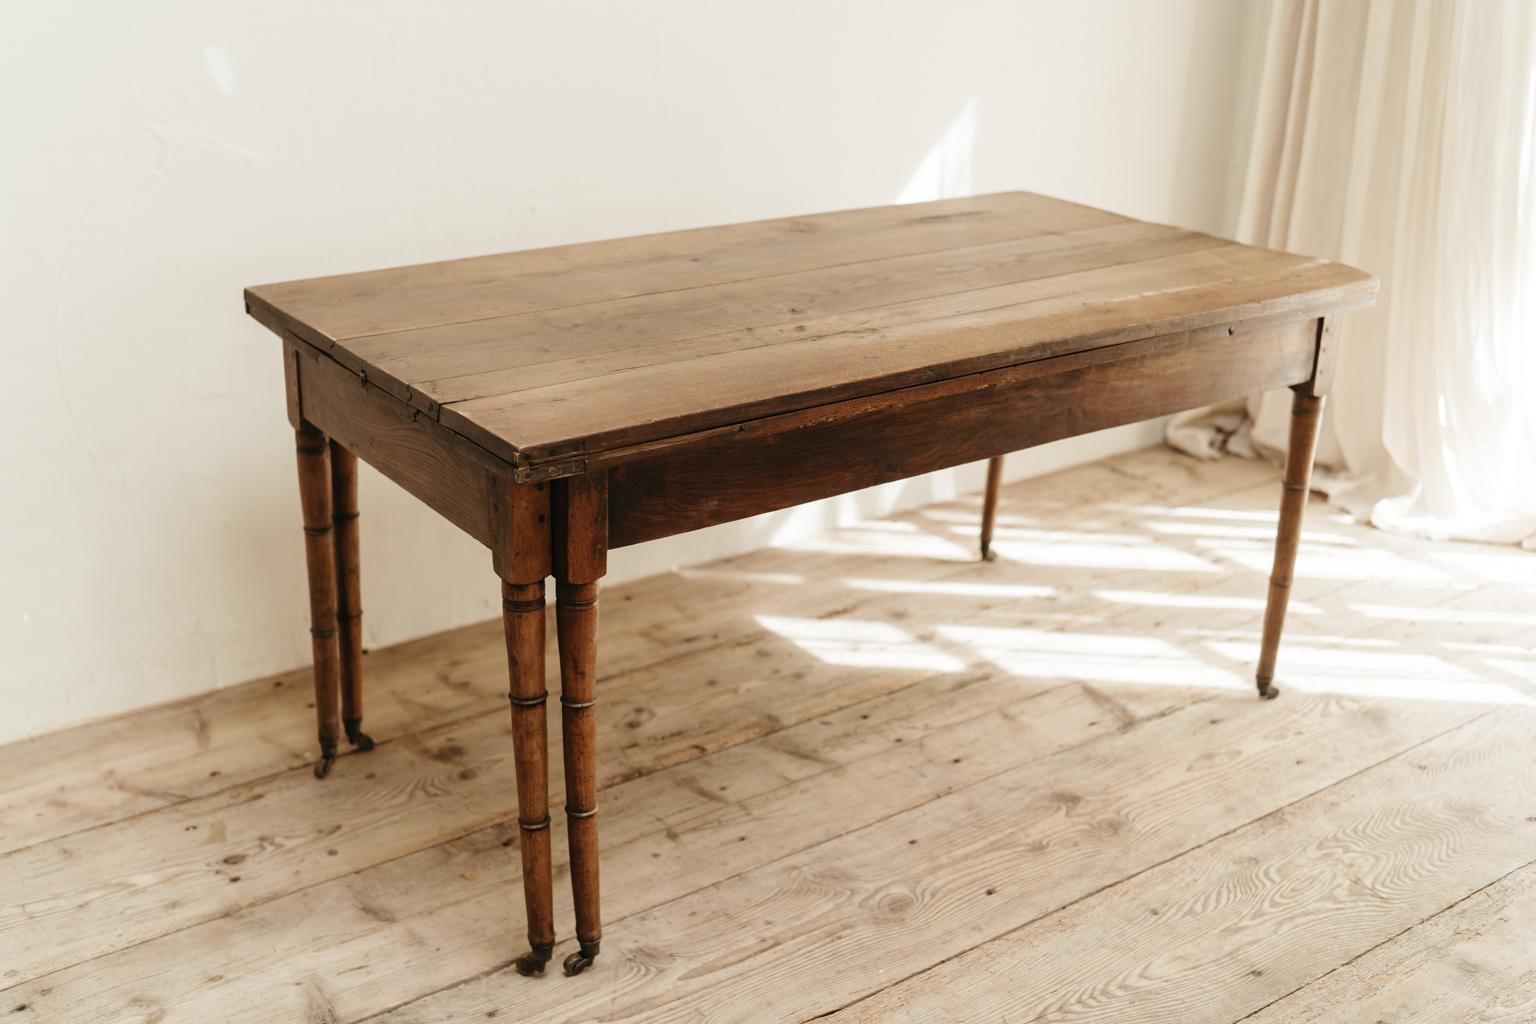 a french oak farmhouse table, closed the dimensions are 148 x 79 x 74 cm high,
open 300 cm x 79 x 71 cm high, as pure as it gets, ready to use, great patina!.
 